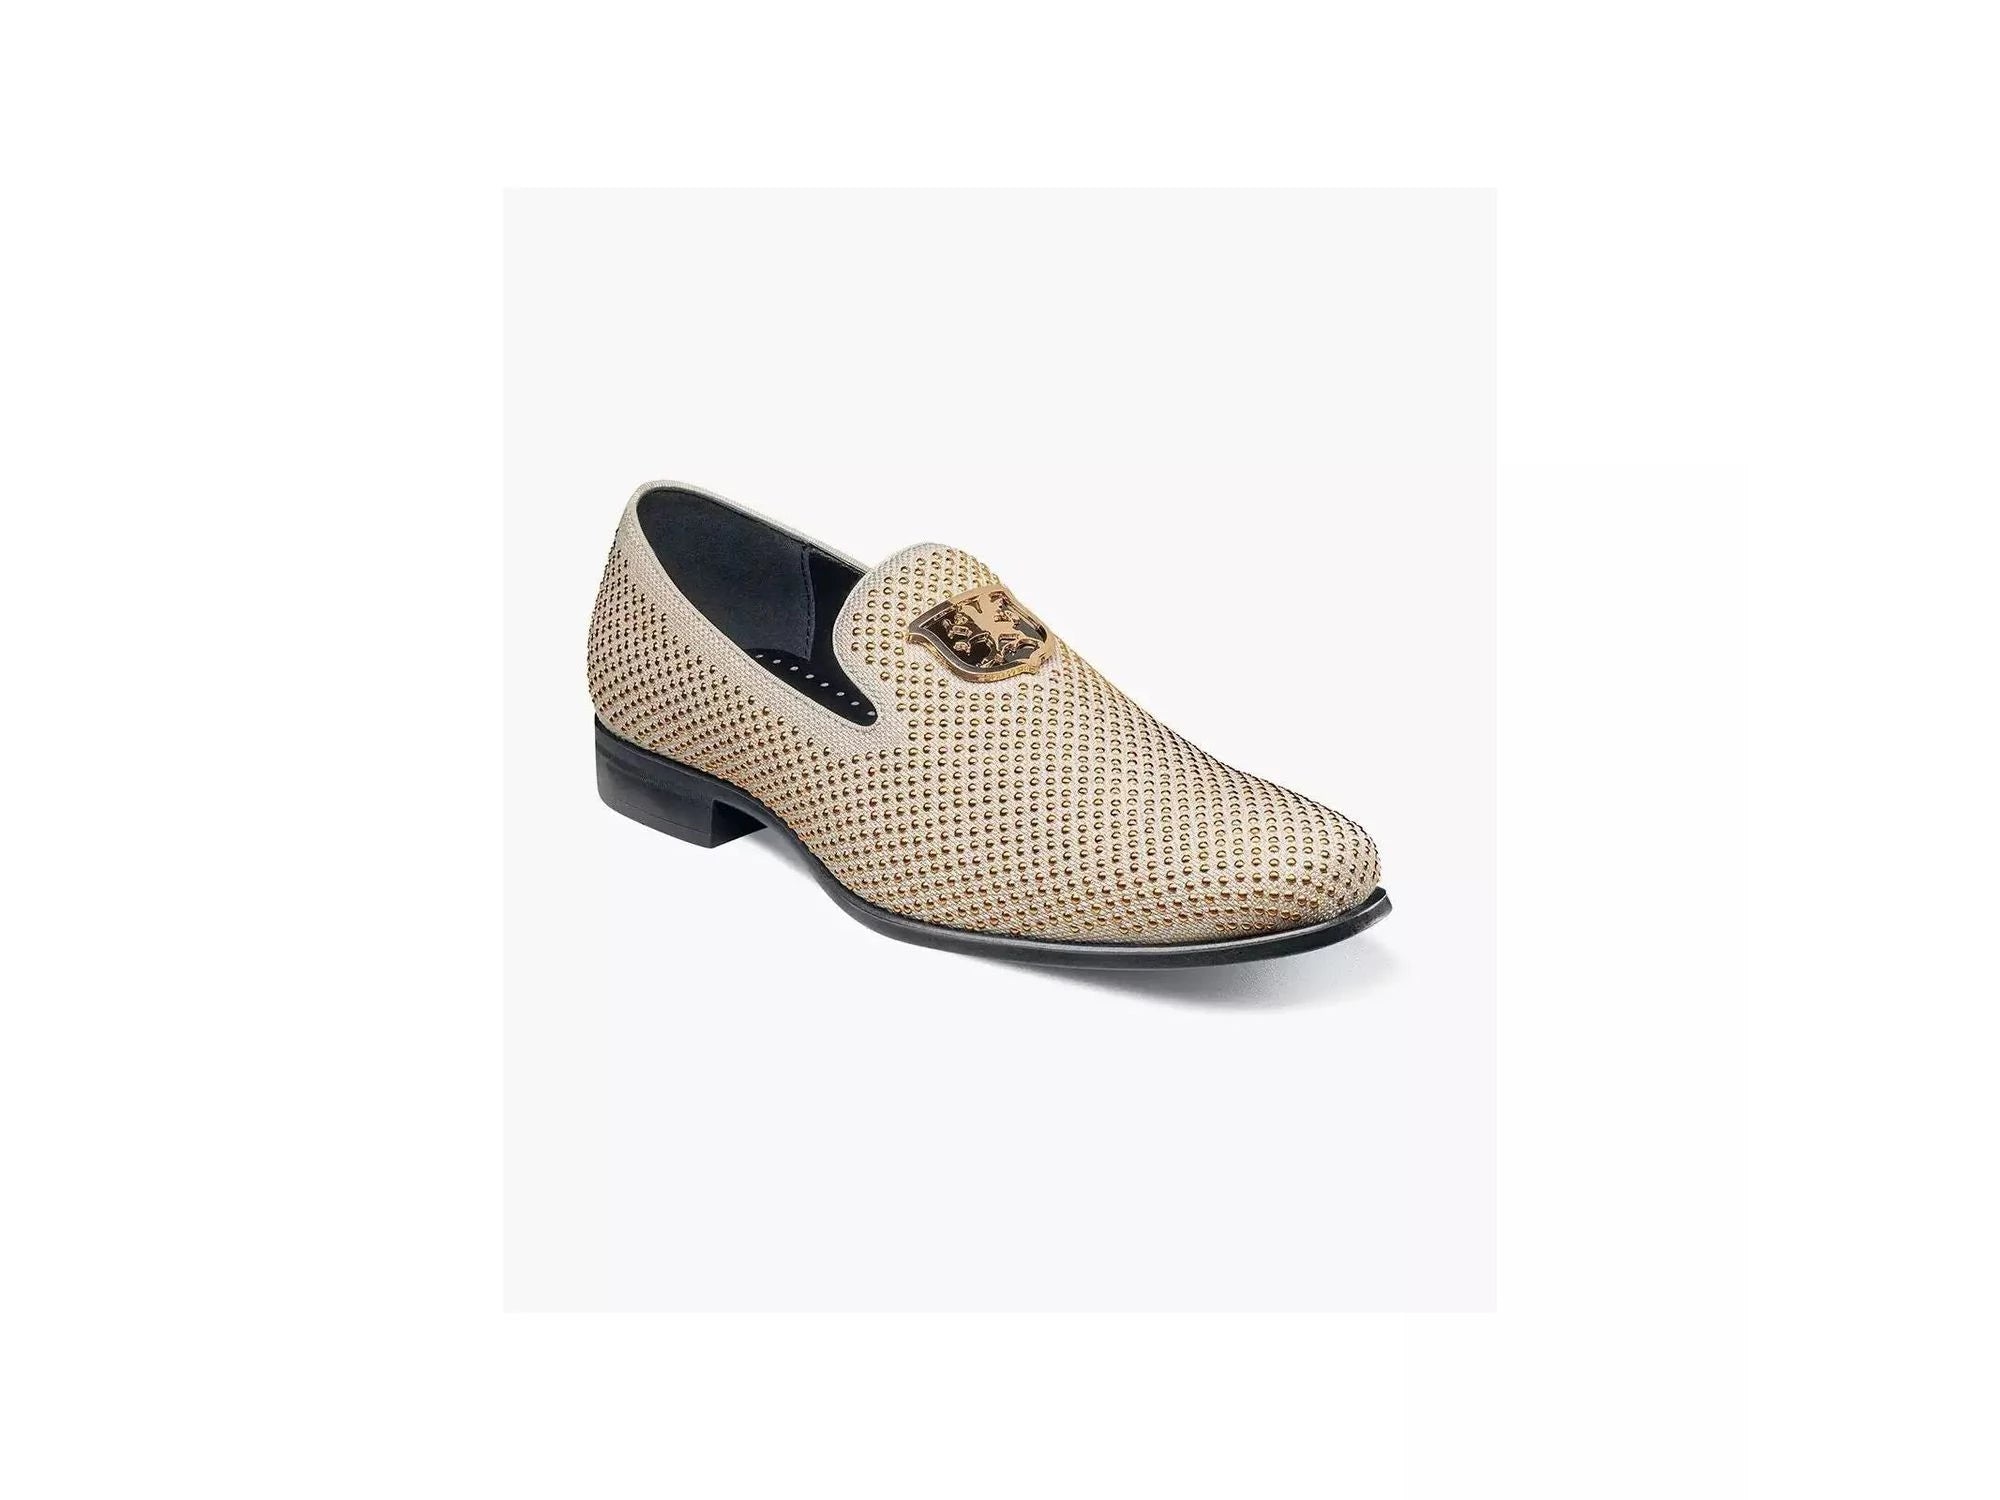 Stacy Adams Swagger Formal Loafer in Natural Linen